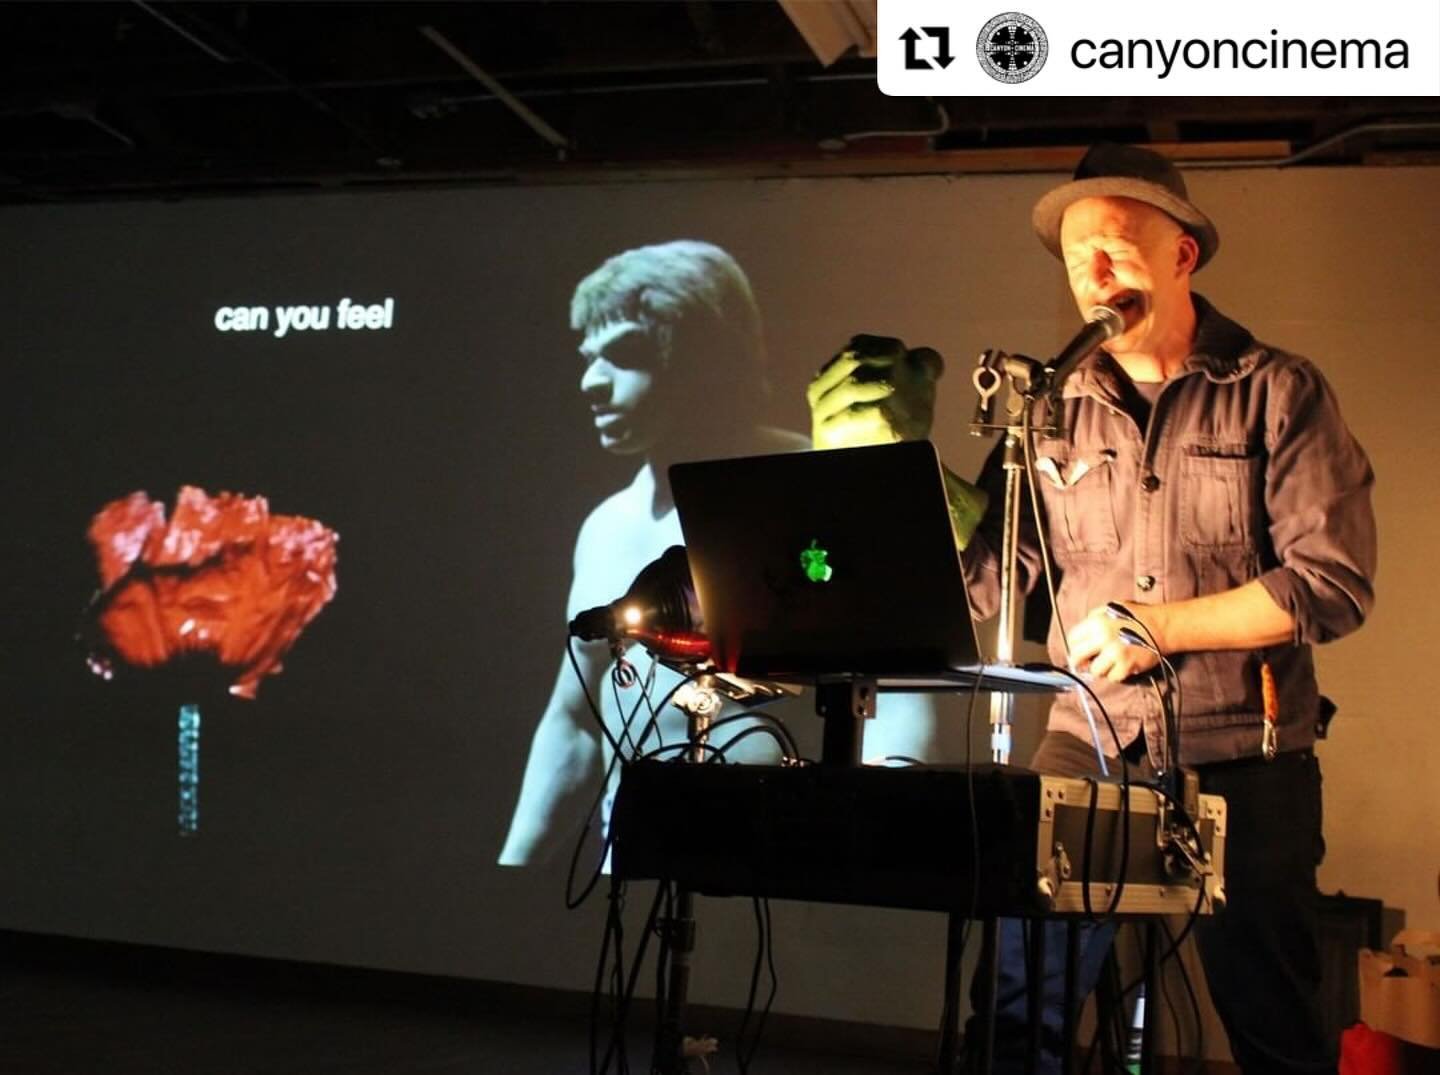 Tonight, screening/performance starting 8pm. Come out and support Bay Area arts! @canyoncinema @500cappstreet 
・・・
SEEING SOUND
Sundown, Saturday, May 4
500 Capp Street, SF

🌇 A rooftop screening of visual music from Canyon Cinema's collection, with